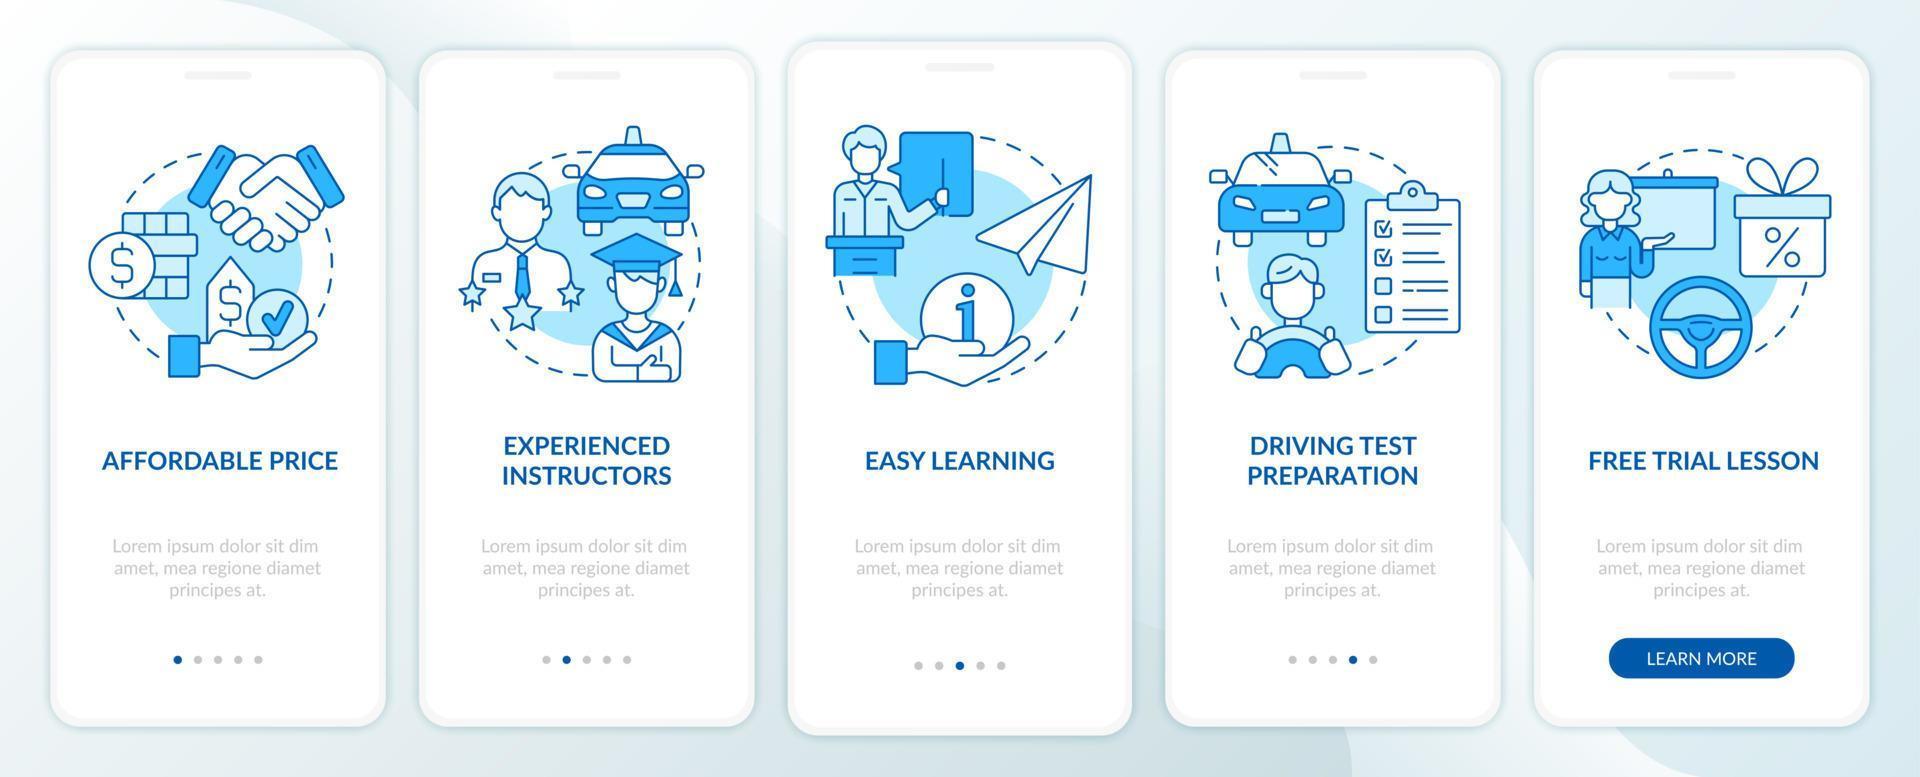 Driving school benefits blue onboarding mobile app page screen. Advantages walkthrough 5 steps graphic instructions with concepts. UI, UX, GUI vector template with linear color illustrations